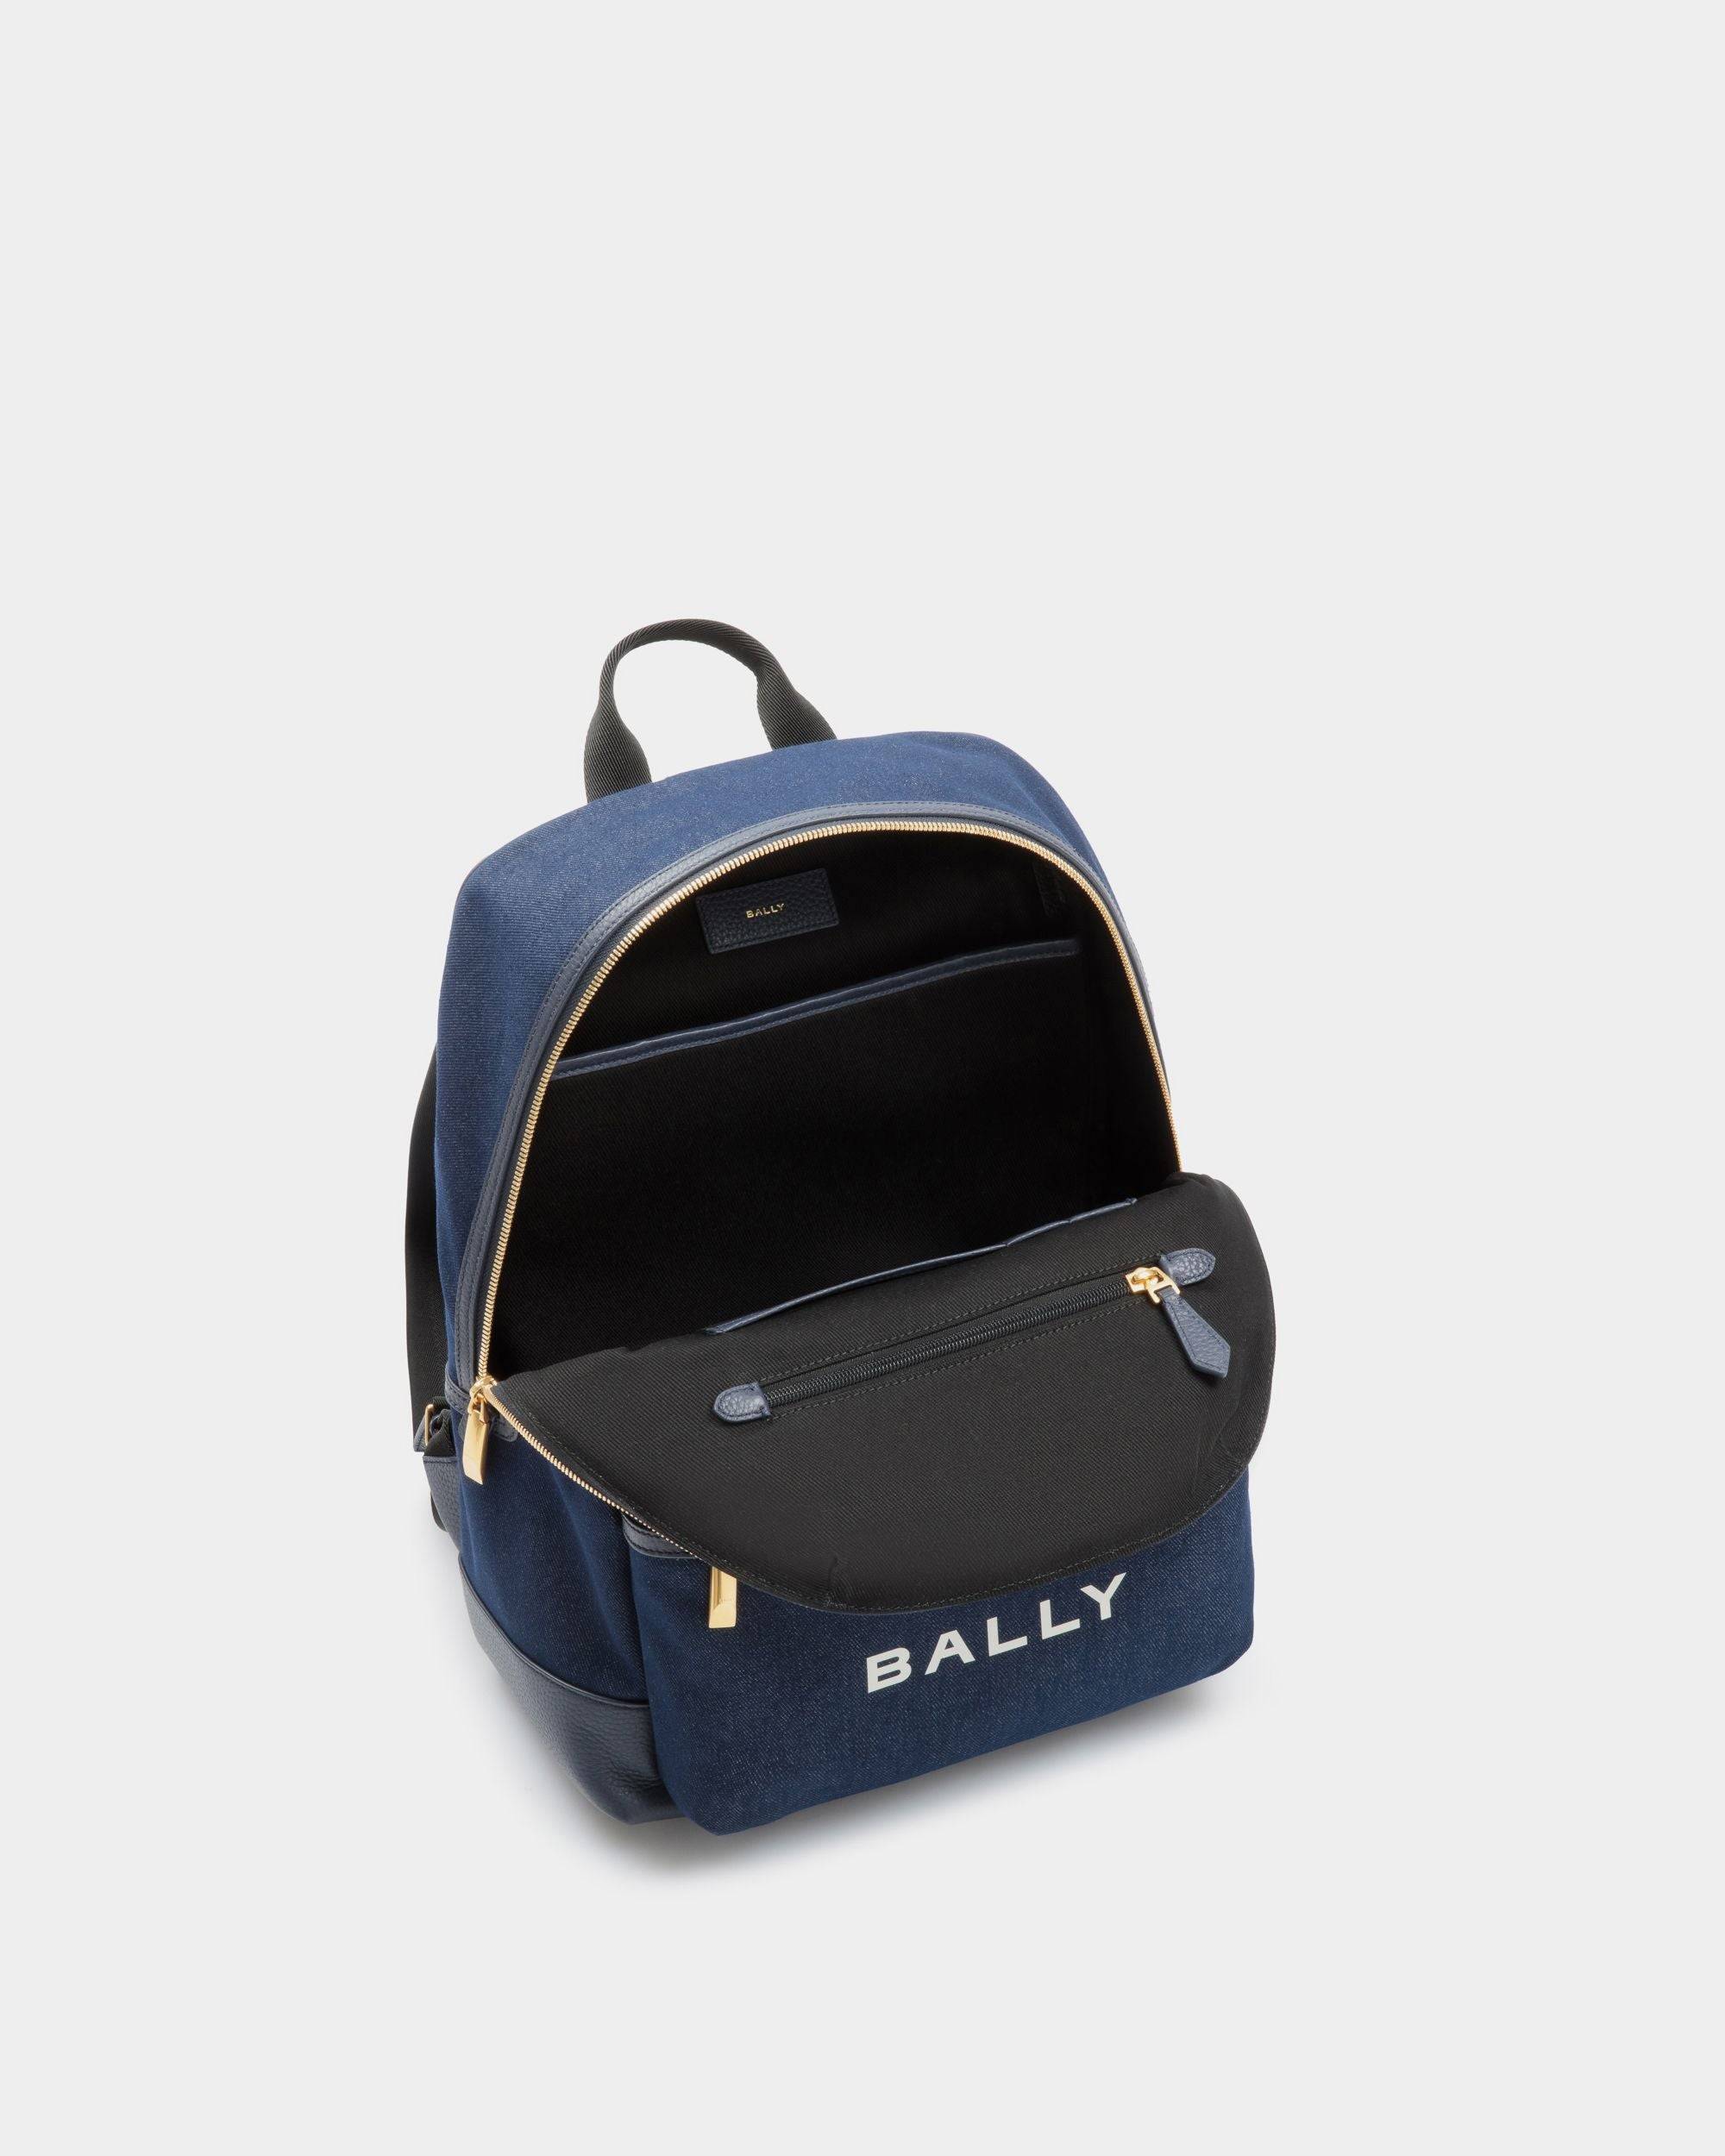 Bar | Men's Backpack in Blue Canvas And Leather | Bally | Still Life Open / Inside